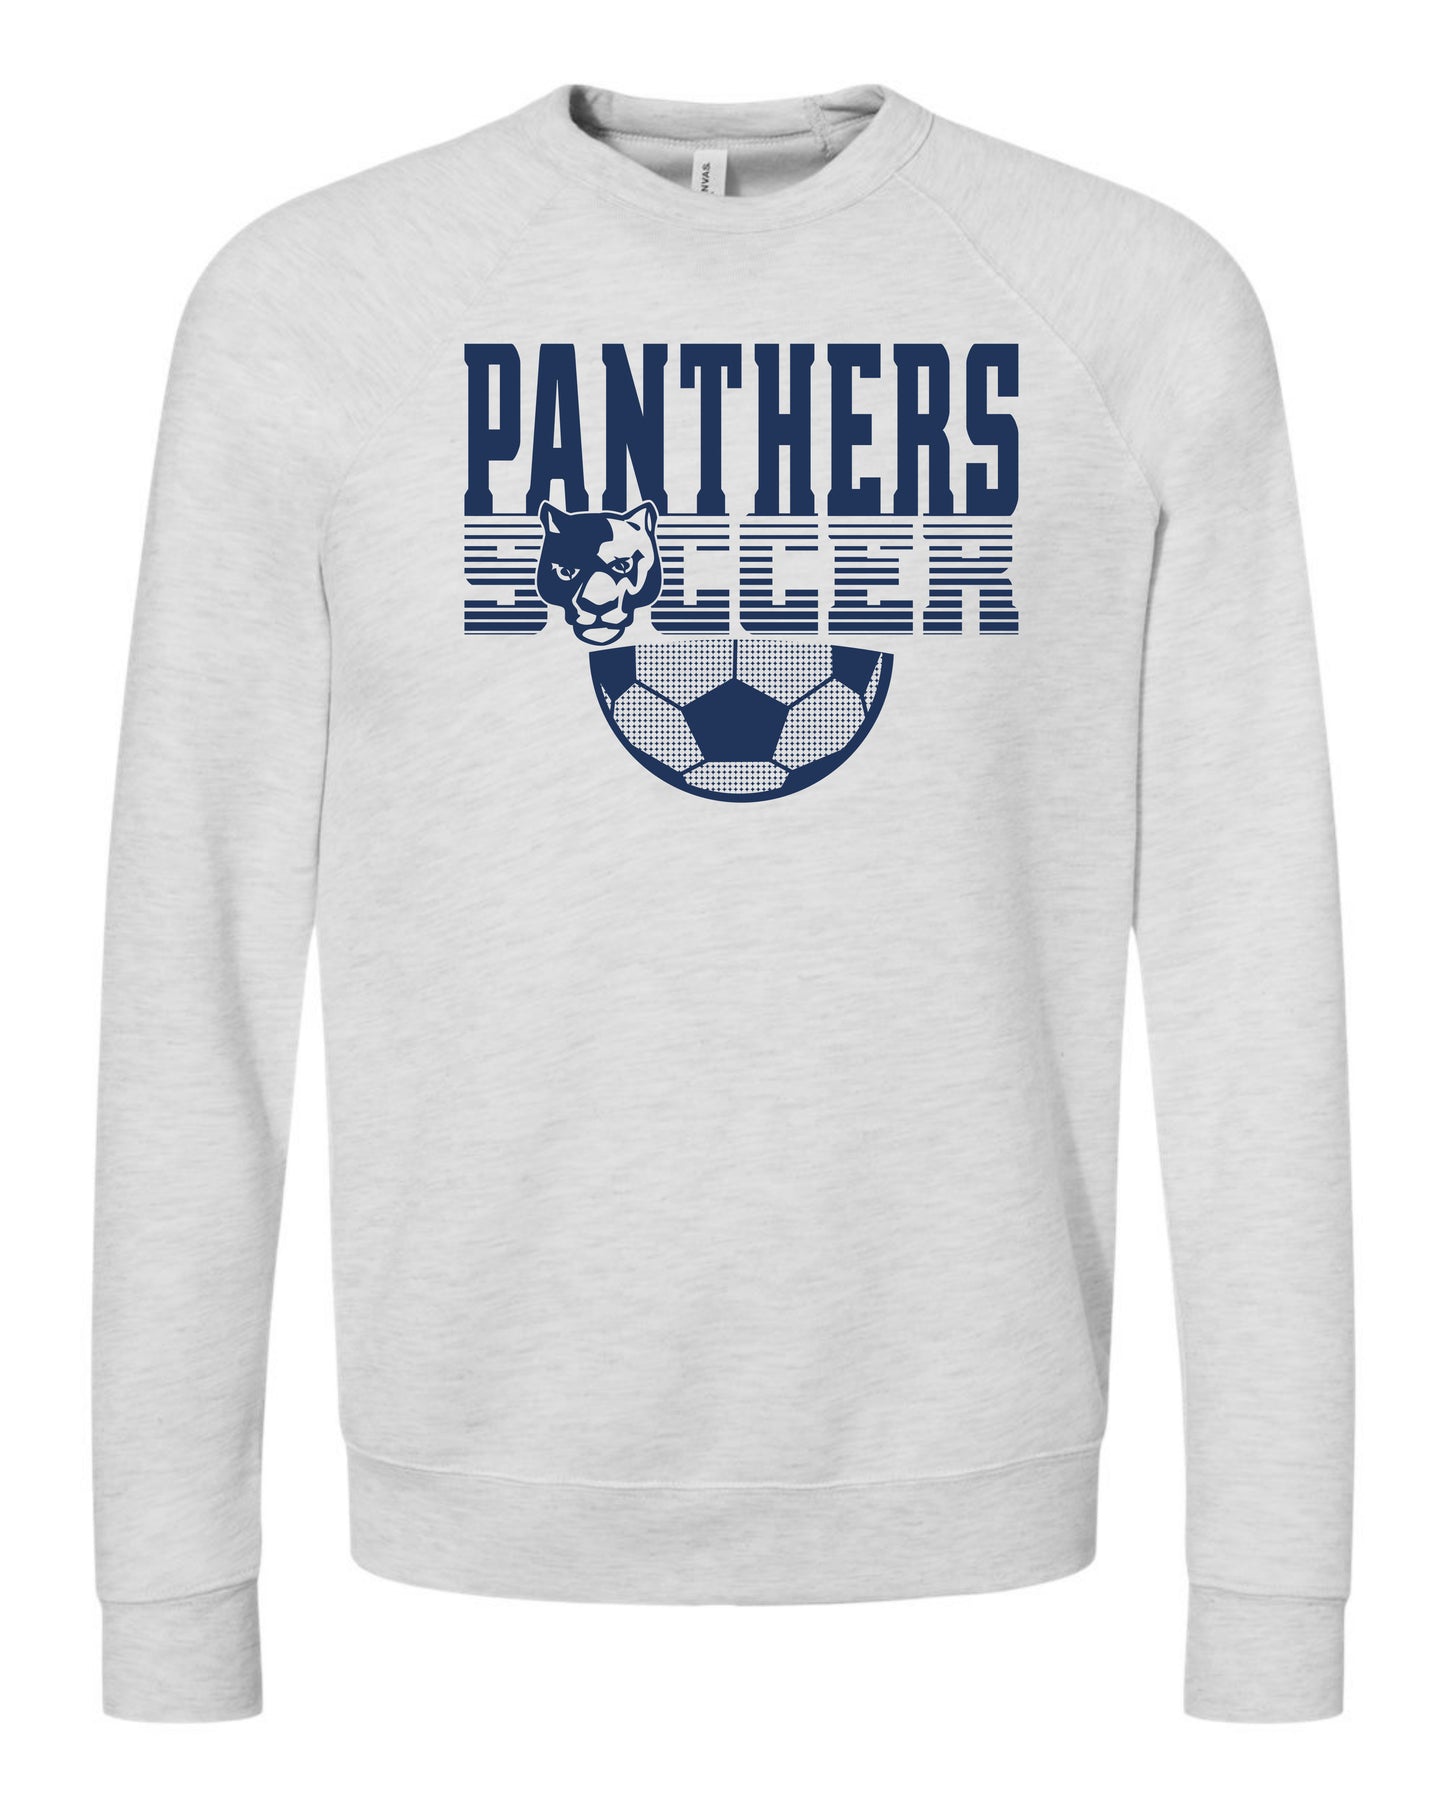 Panthers Soccer Faded - Adult Sweatshirt